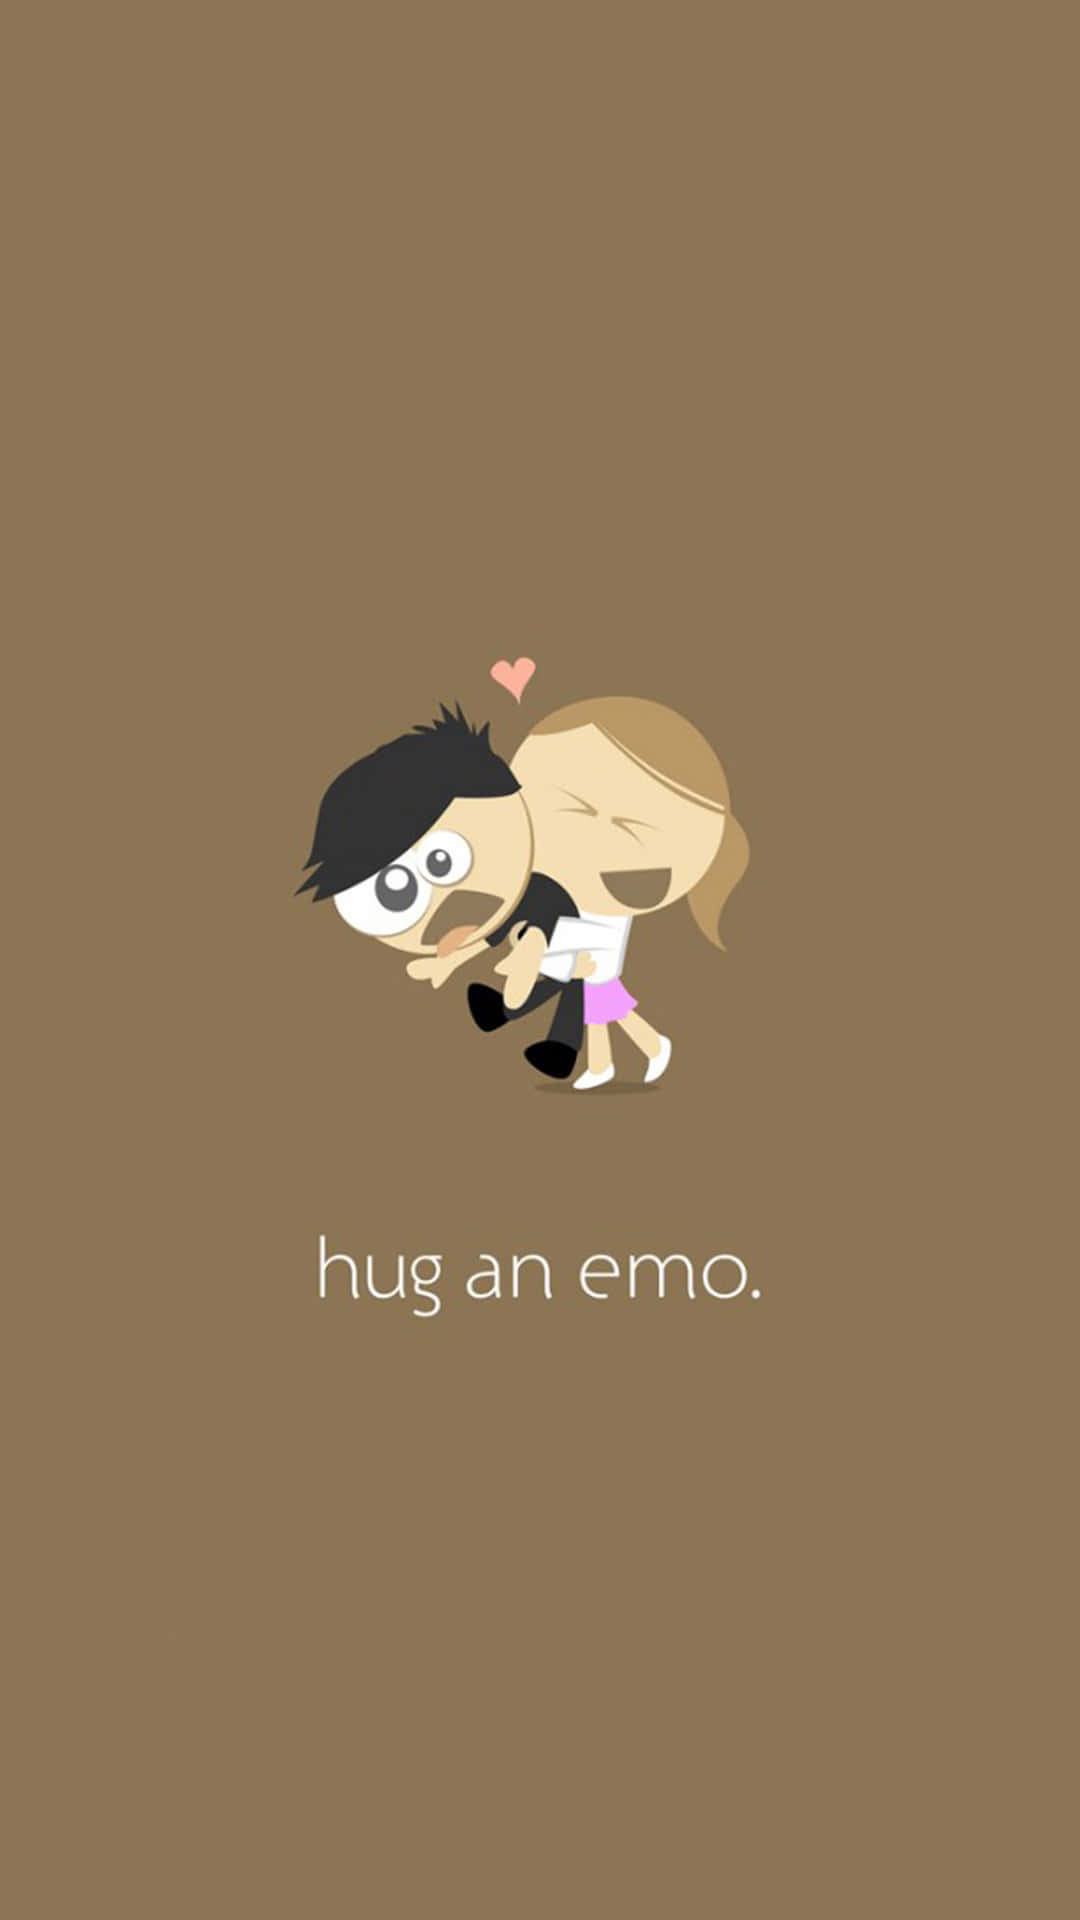 Cute and Stylish Emo IPhone Wallpaper